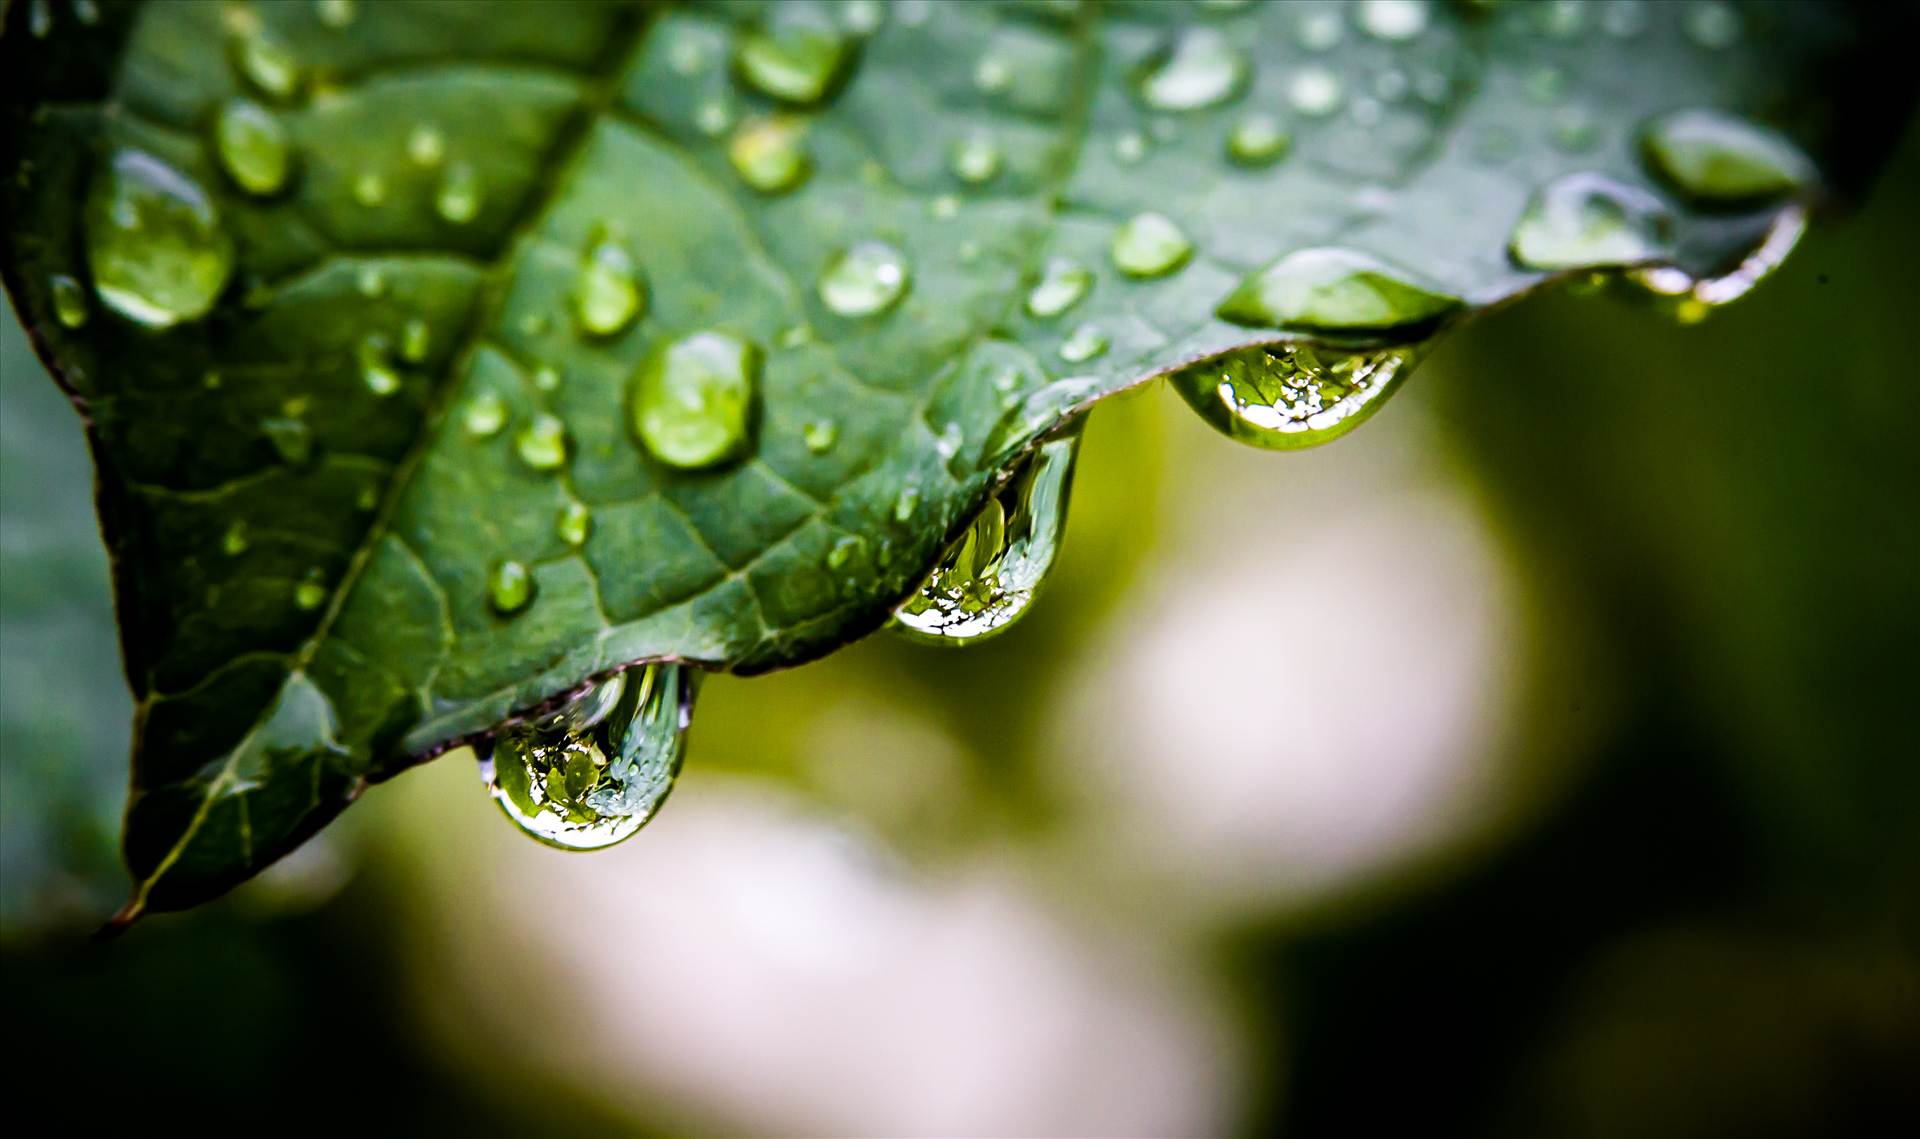 Droplets from leaf.jpg  by WPC-187